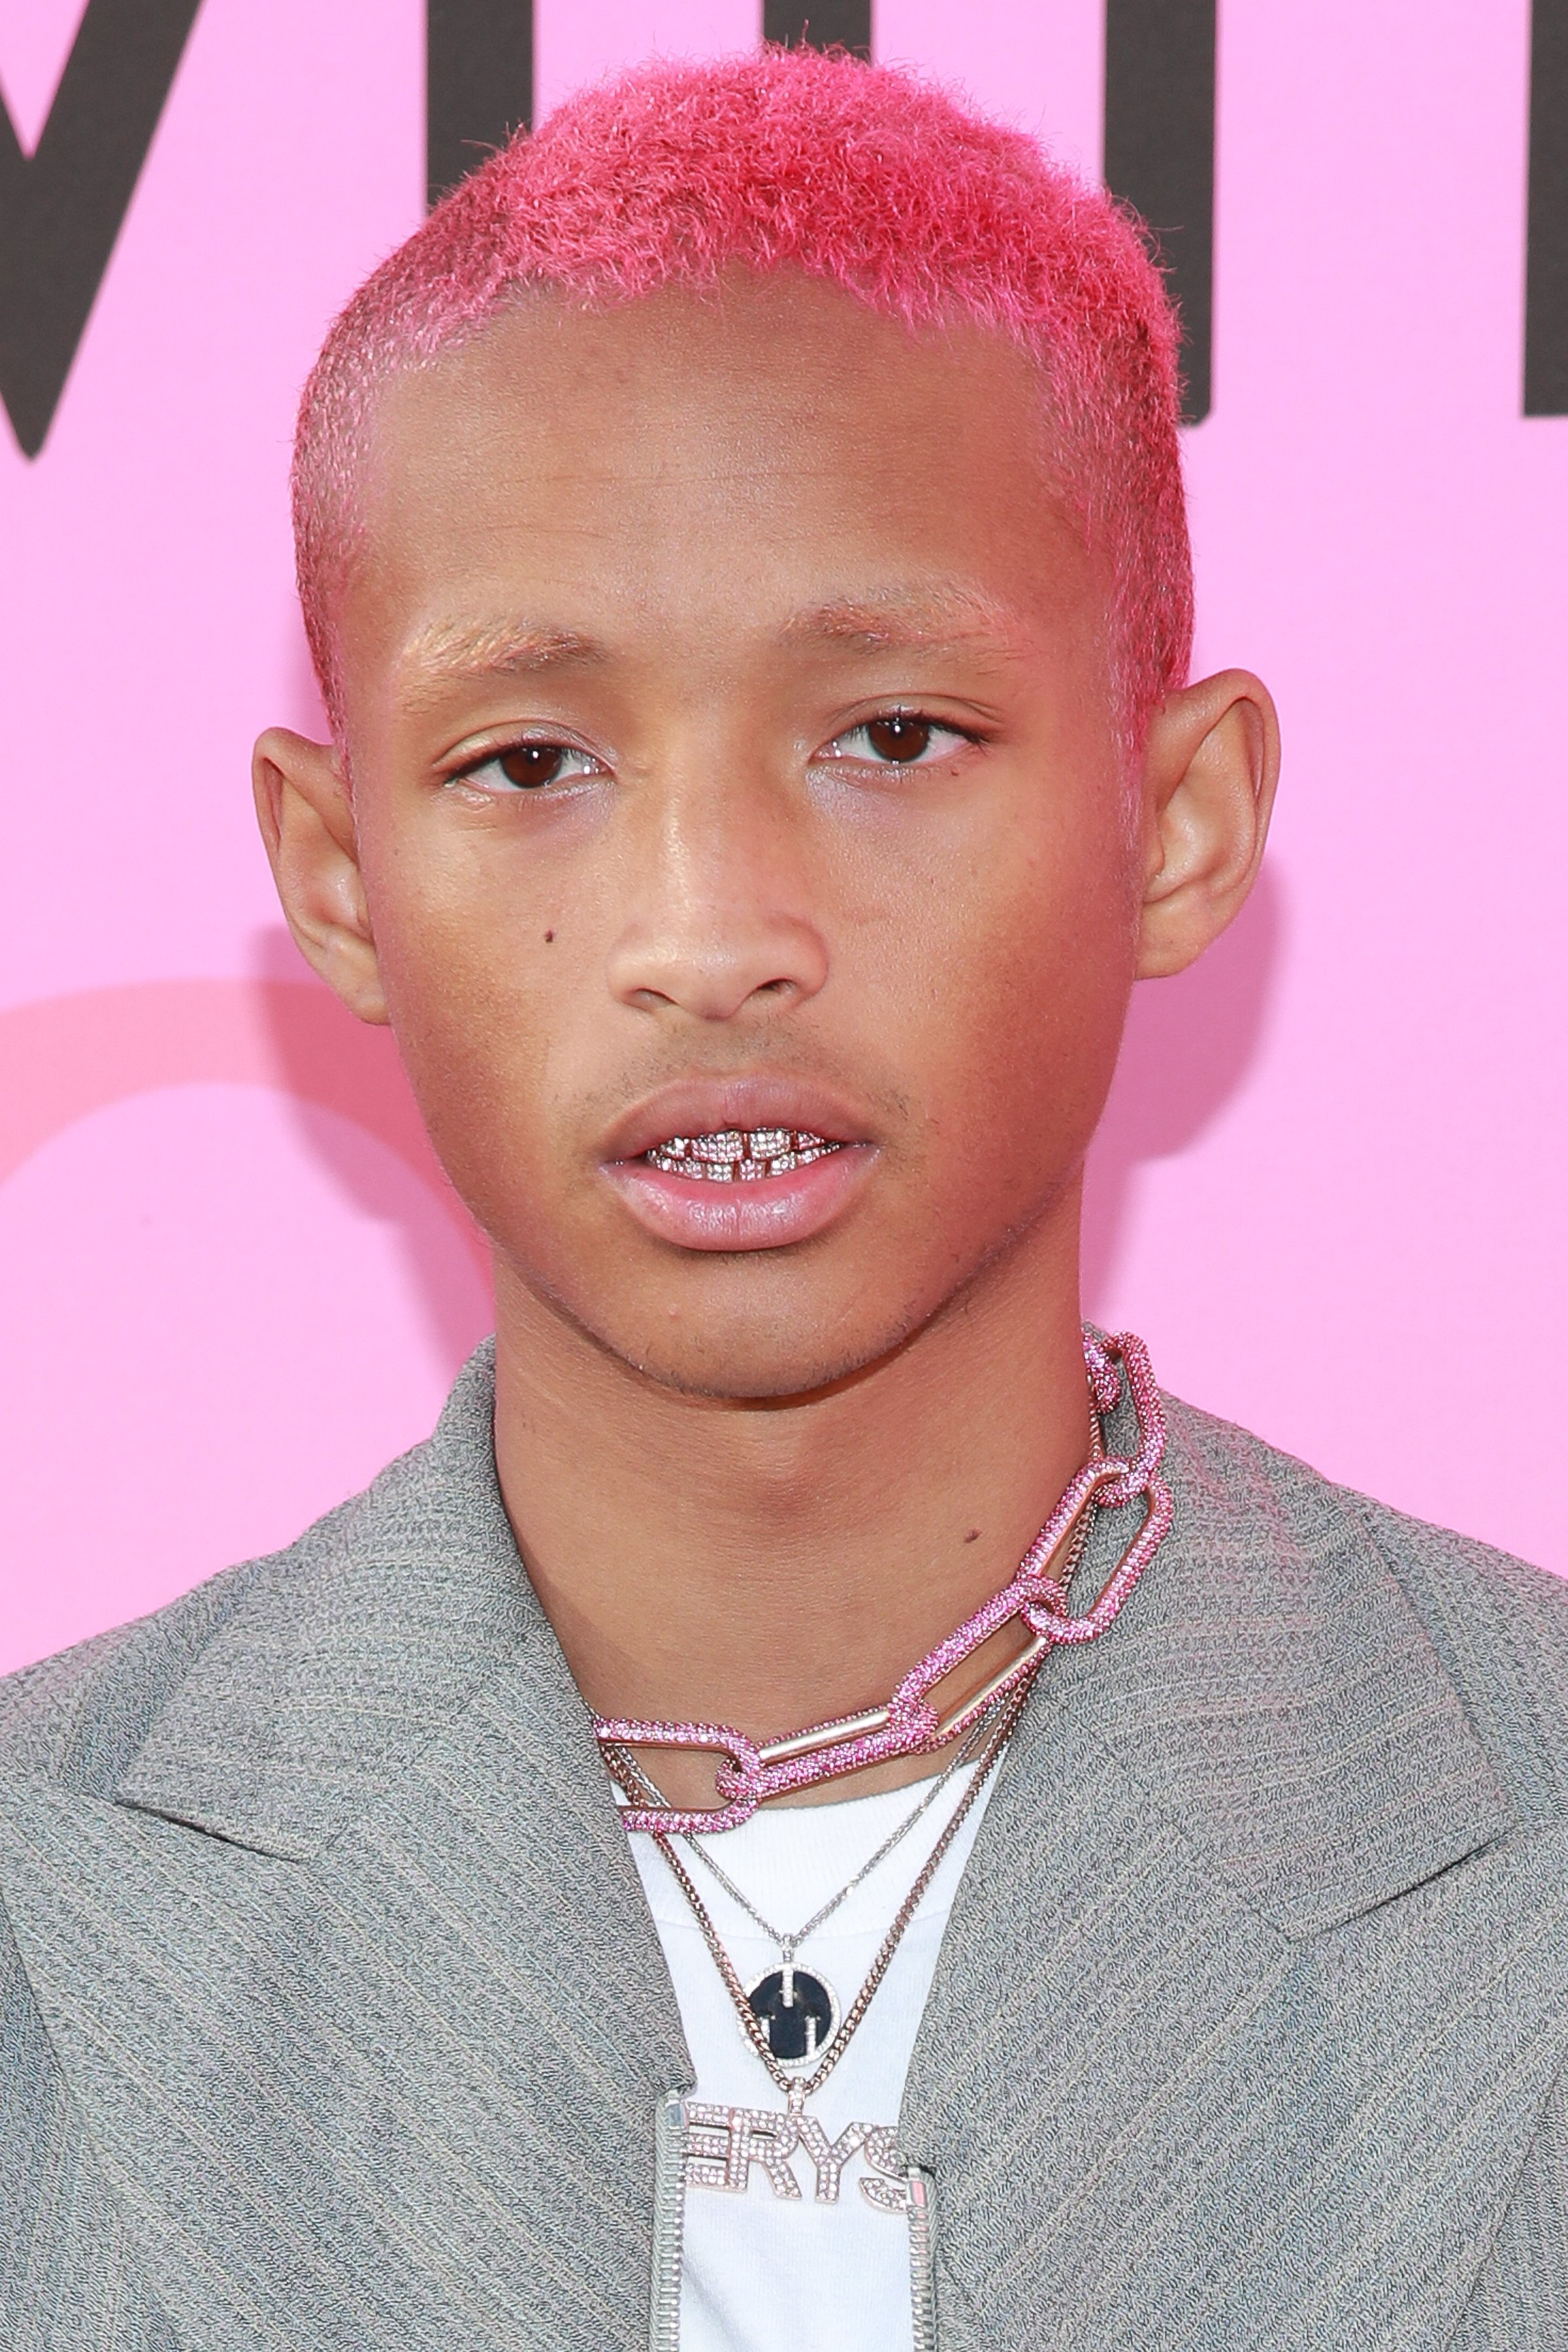 Jaden Smith at a Louis Vuitton Event on Jun. 27, 2019 in California | Photo: Getty Images